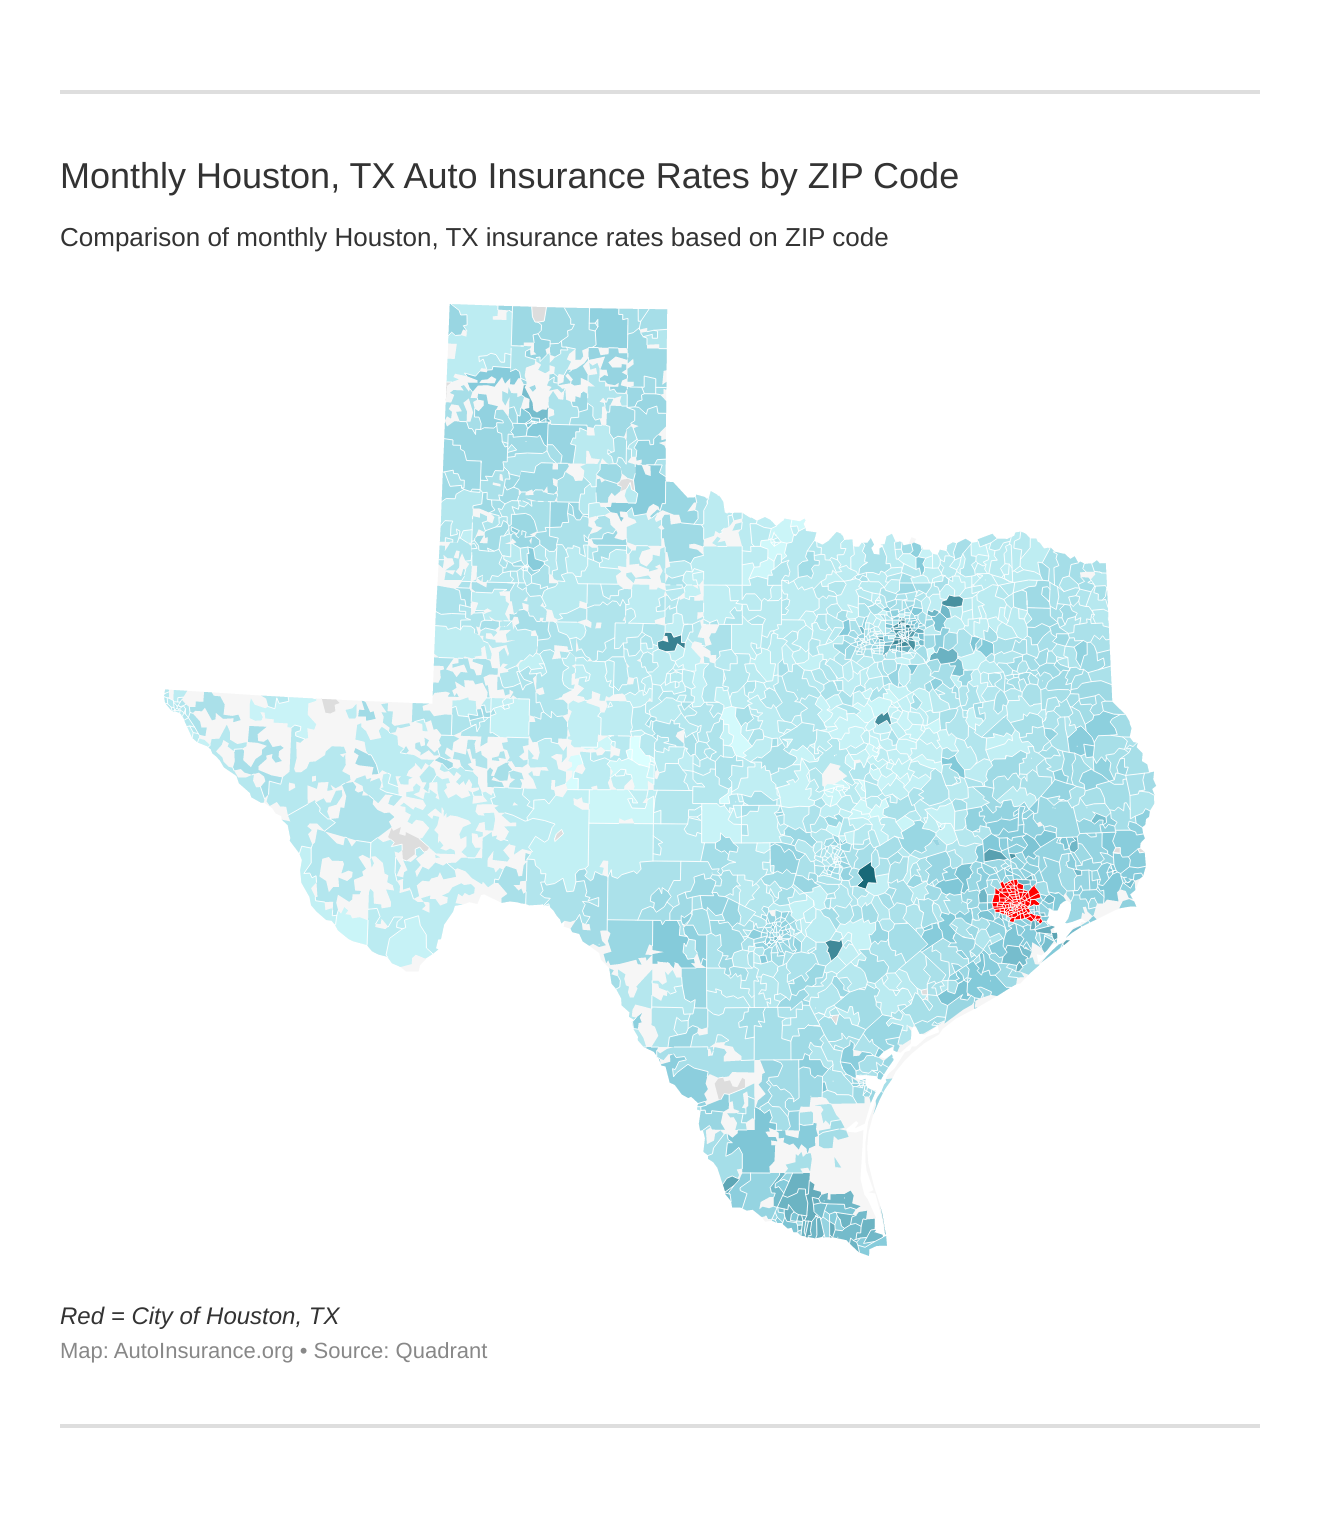 Monthly Houston, TX Auto Insurance Rates by ZIP Code